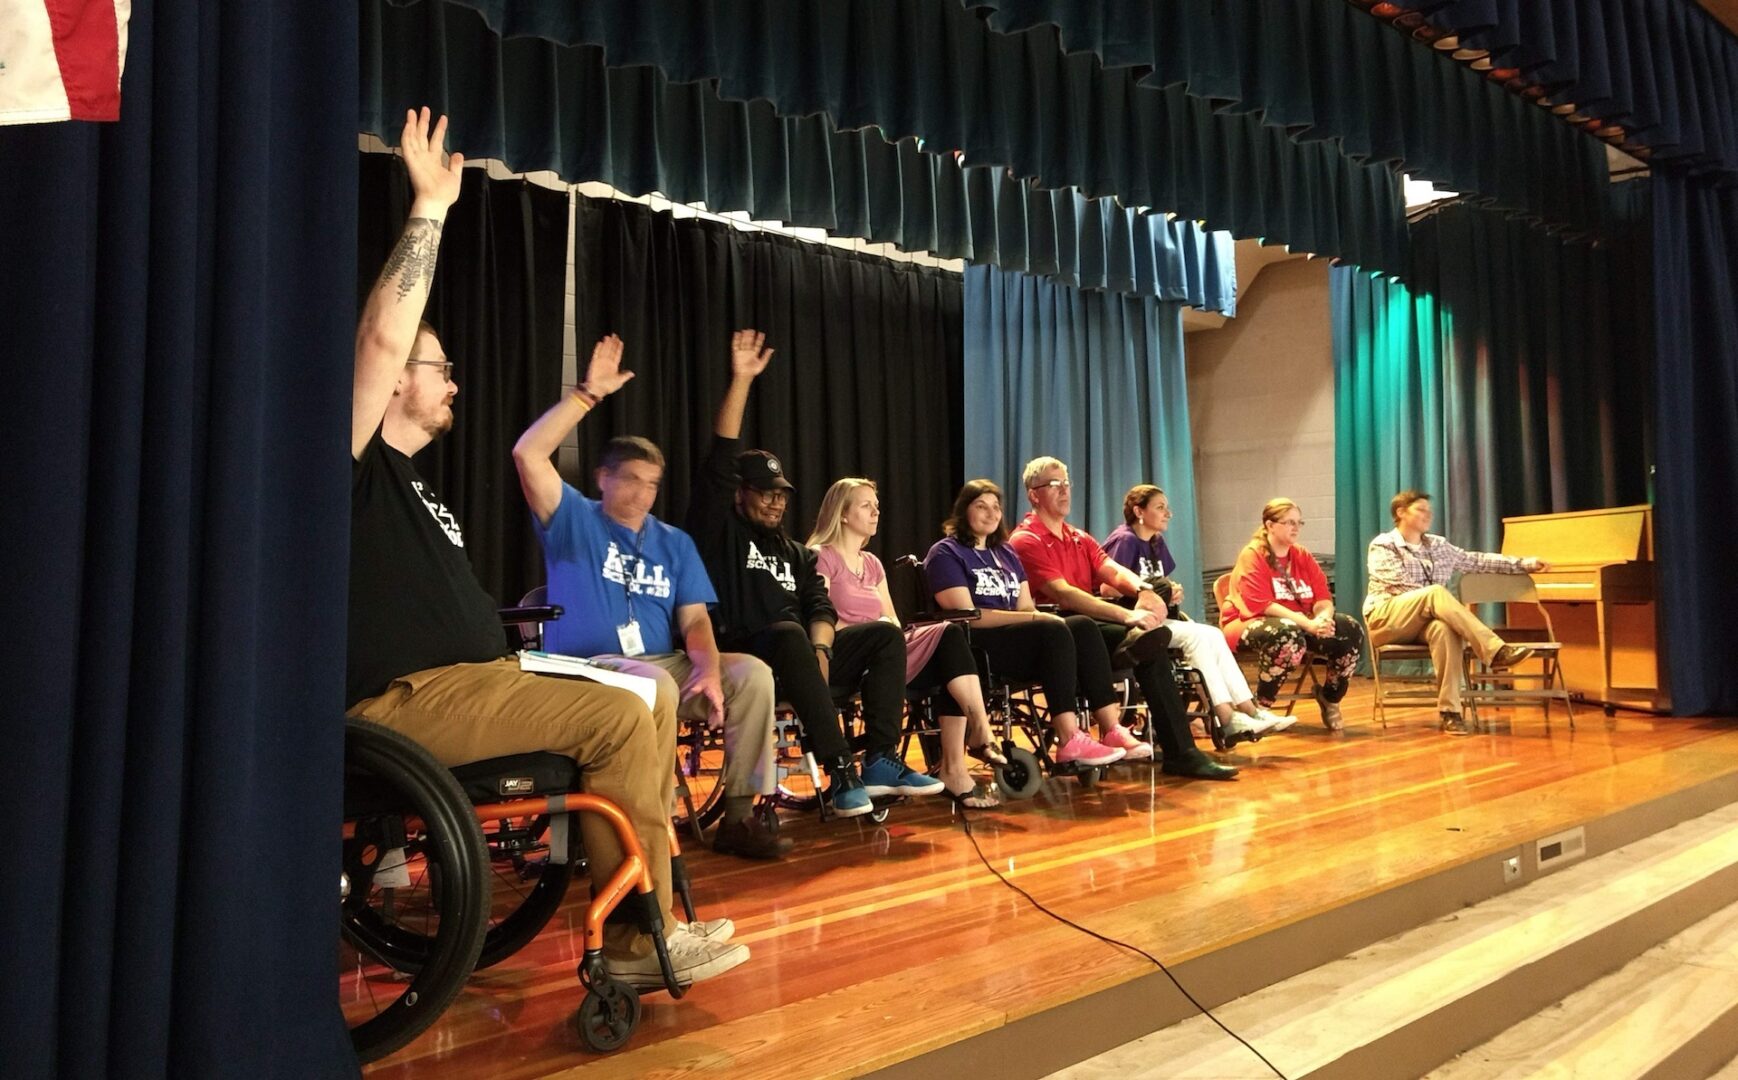 A row of 10 teachers is lined up on a stage, curtains are open. Most of seated in manual wheelchairs. Several have their hands raised, participating in a discussion.